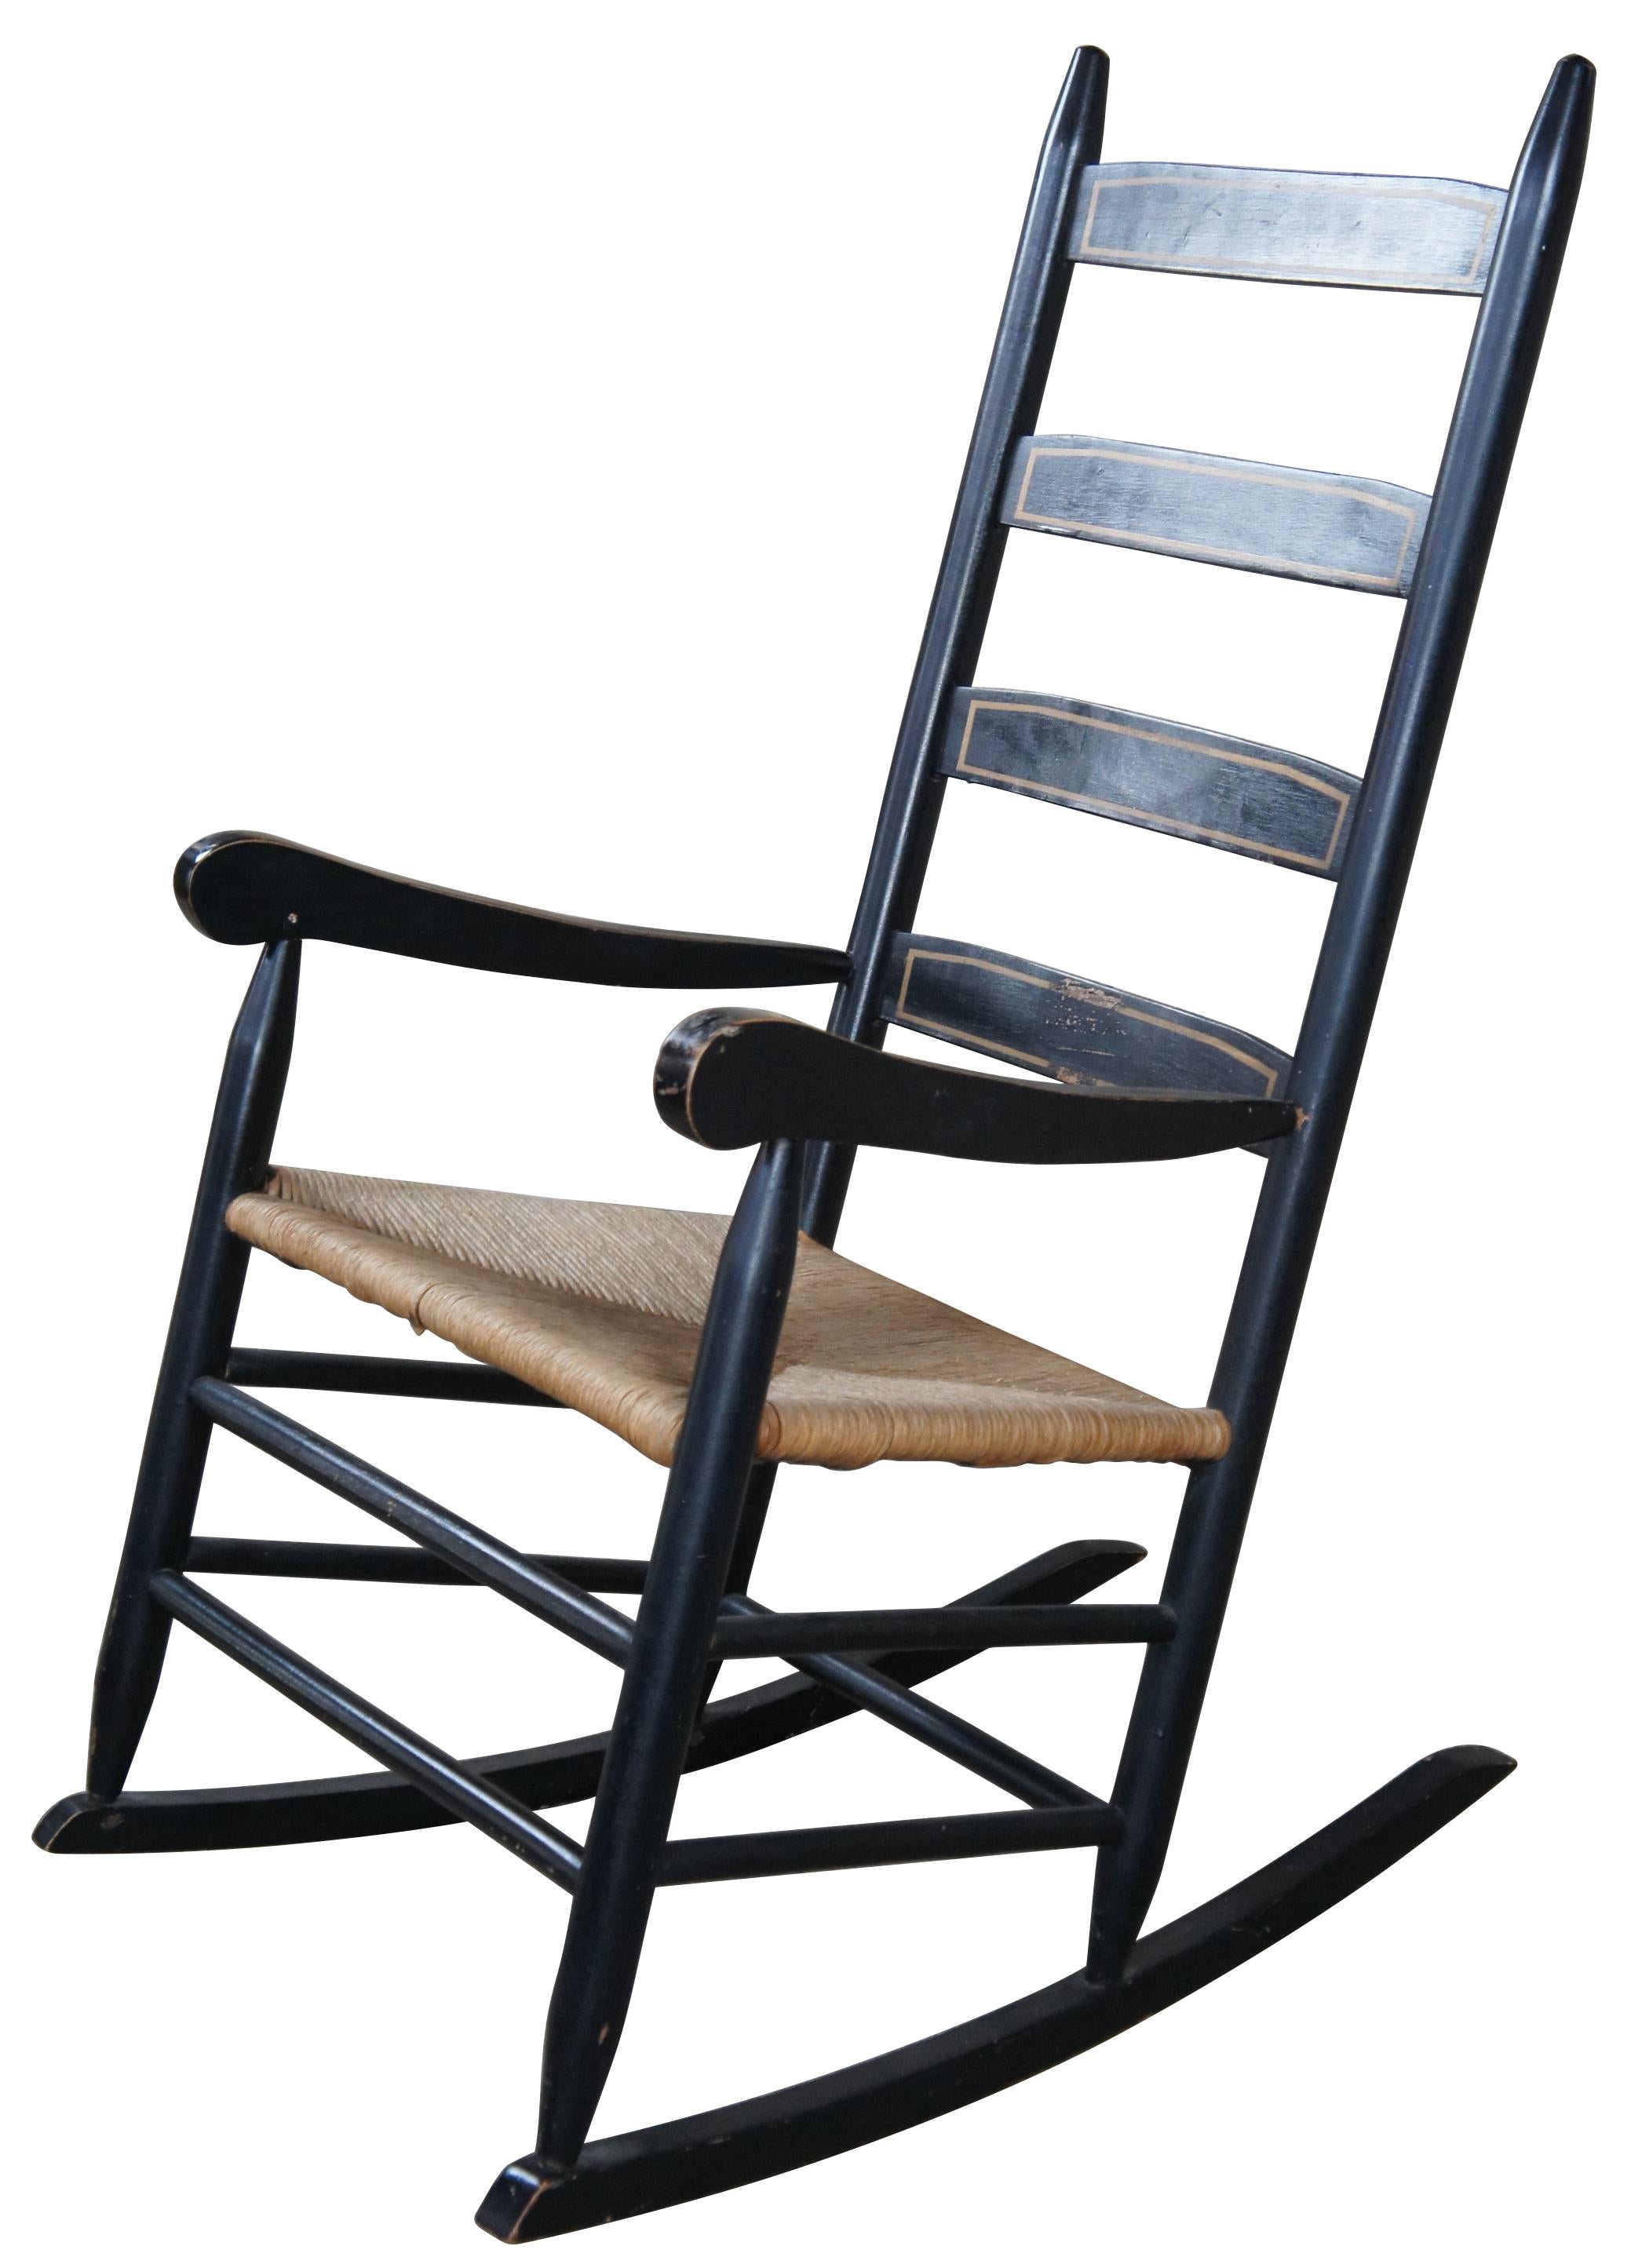 20th Century shaker style rocking chair. Features a black finish with gold trim along the back rails and a rush seat.